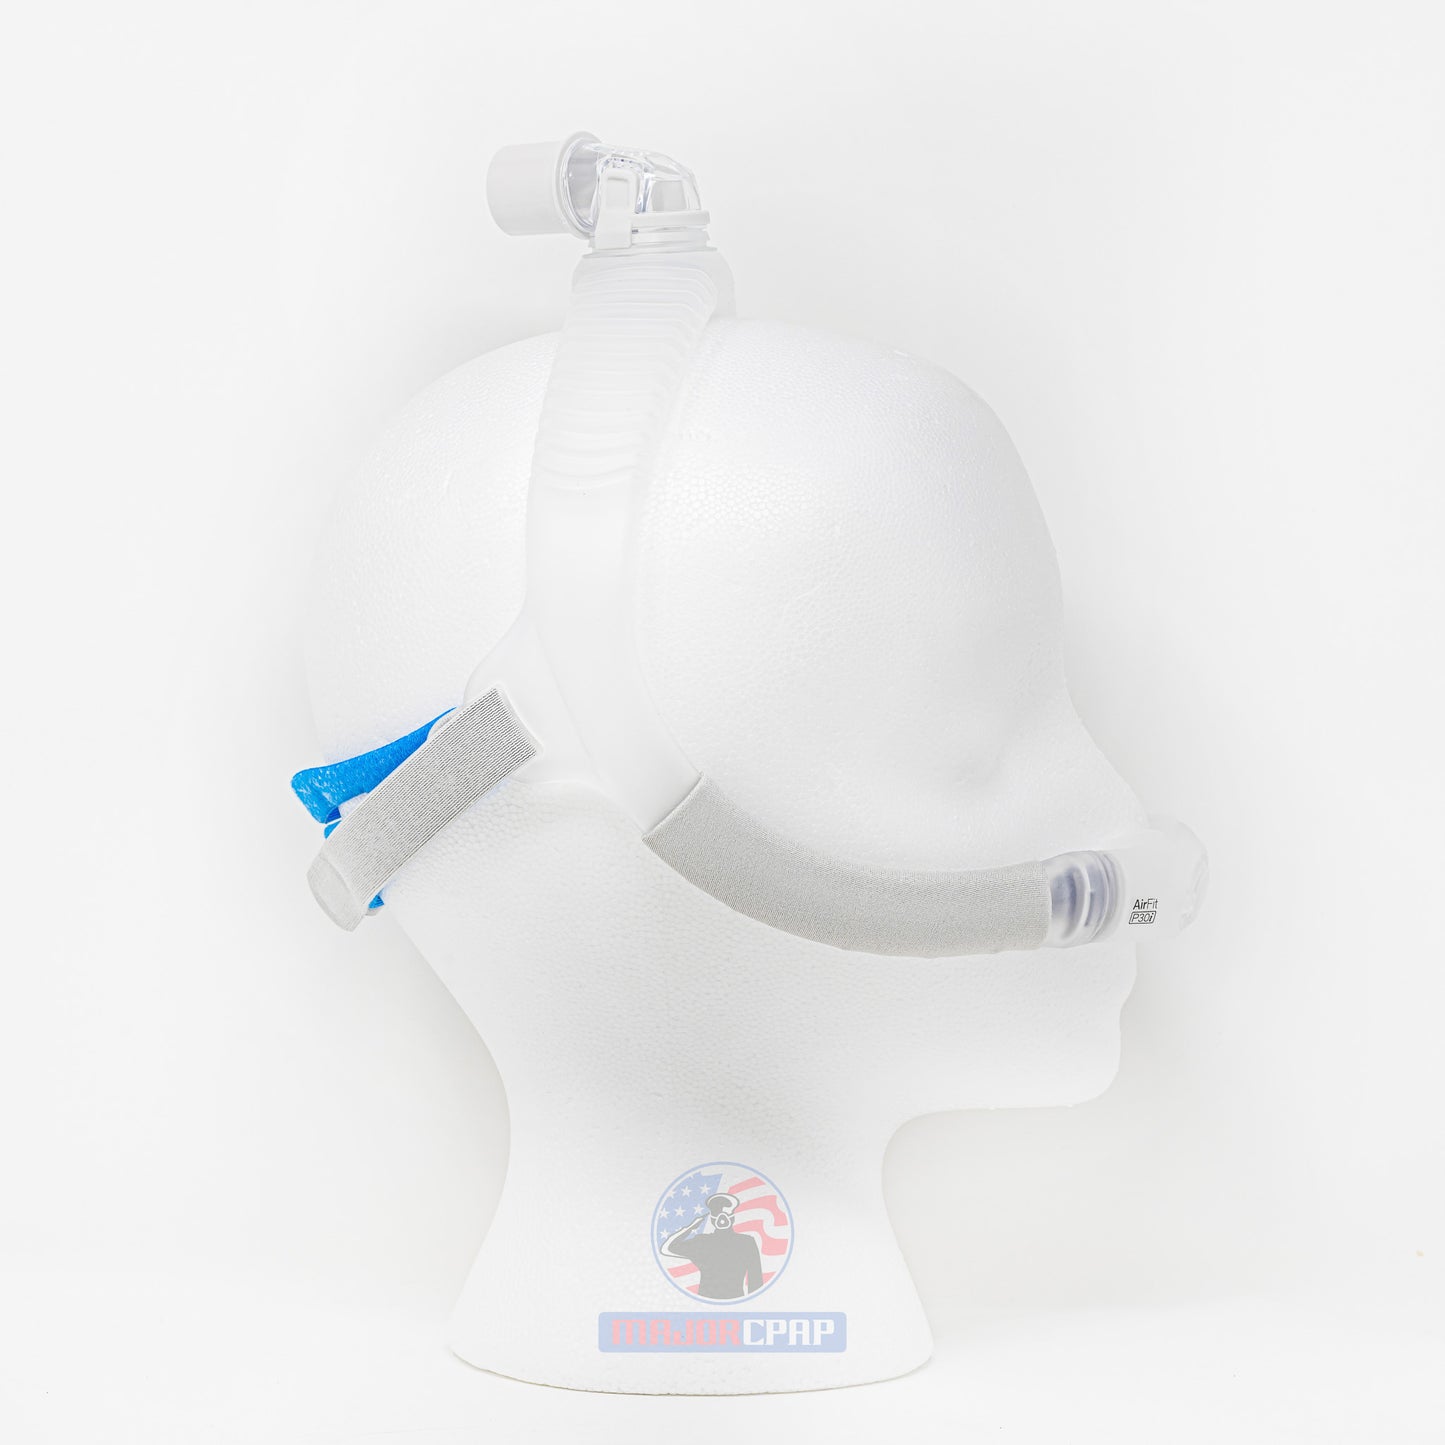 ResMed AirFit P30i Nasal Pillows CPAP Mask with Headgear